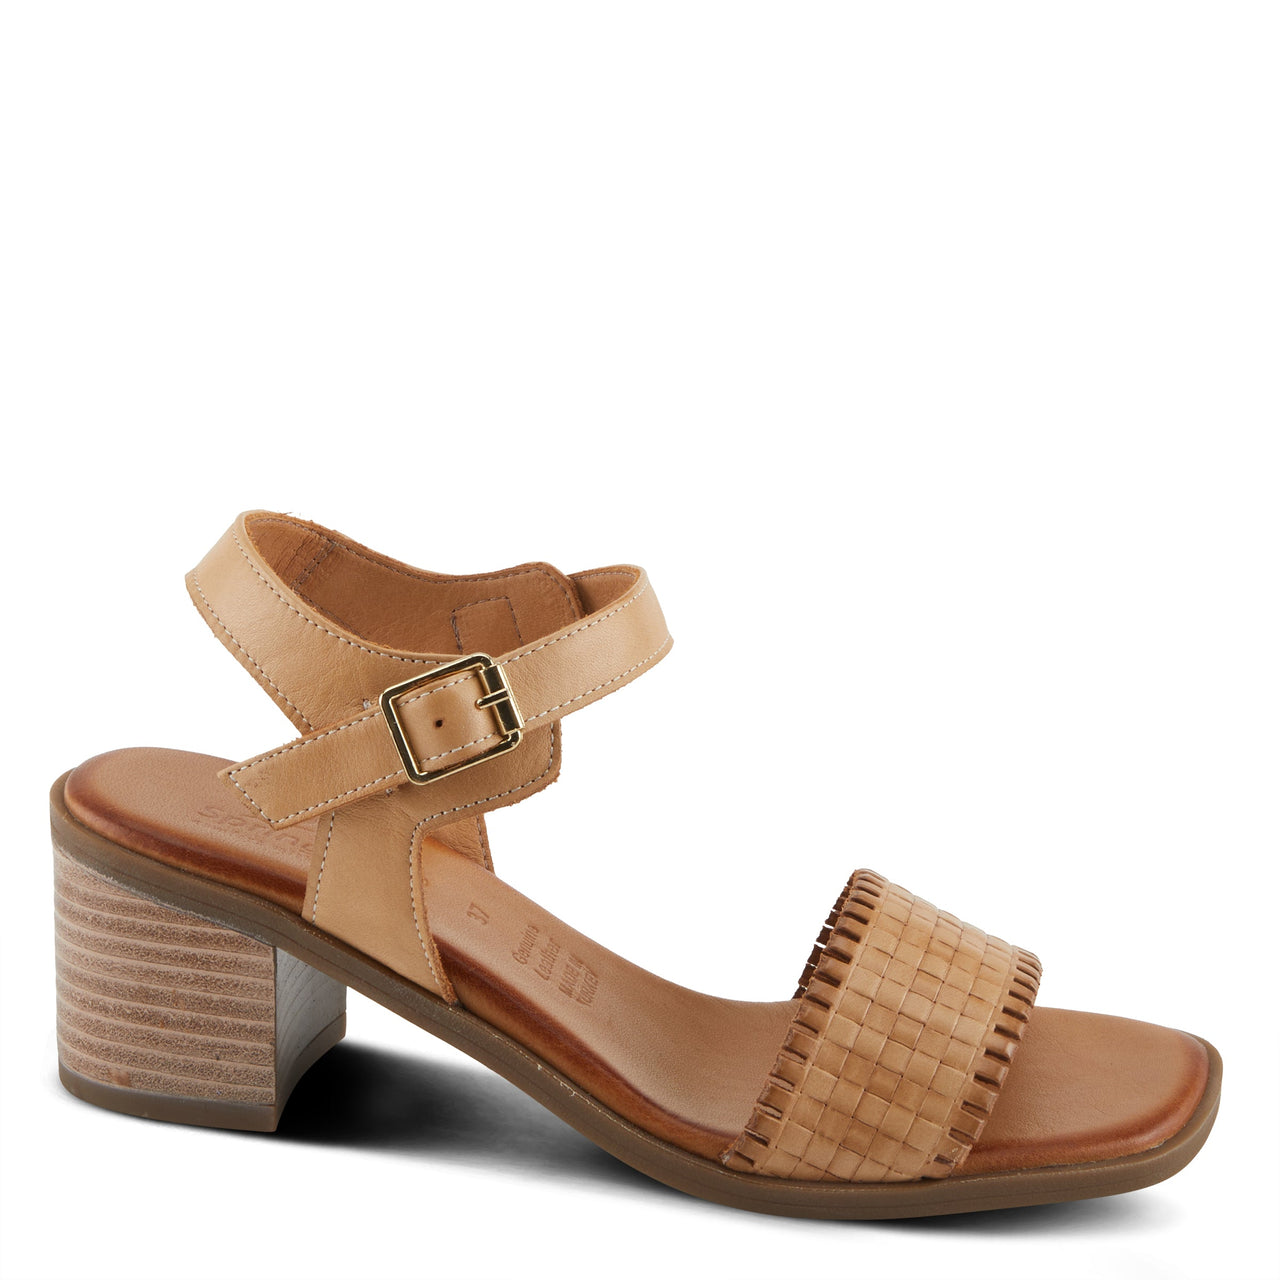 Stylish and comfortable Spring Step Nifona sandals in black leather, perfect for summer outings and casual wear